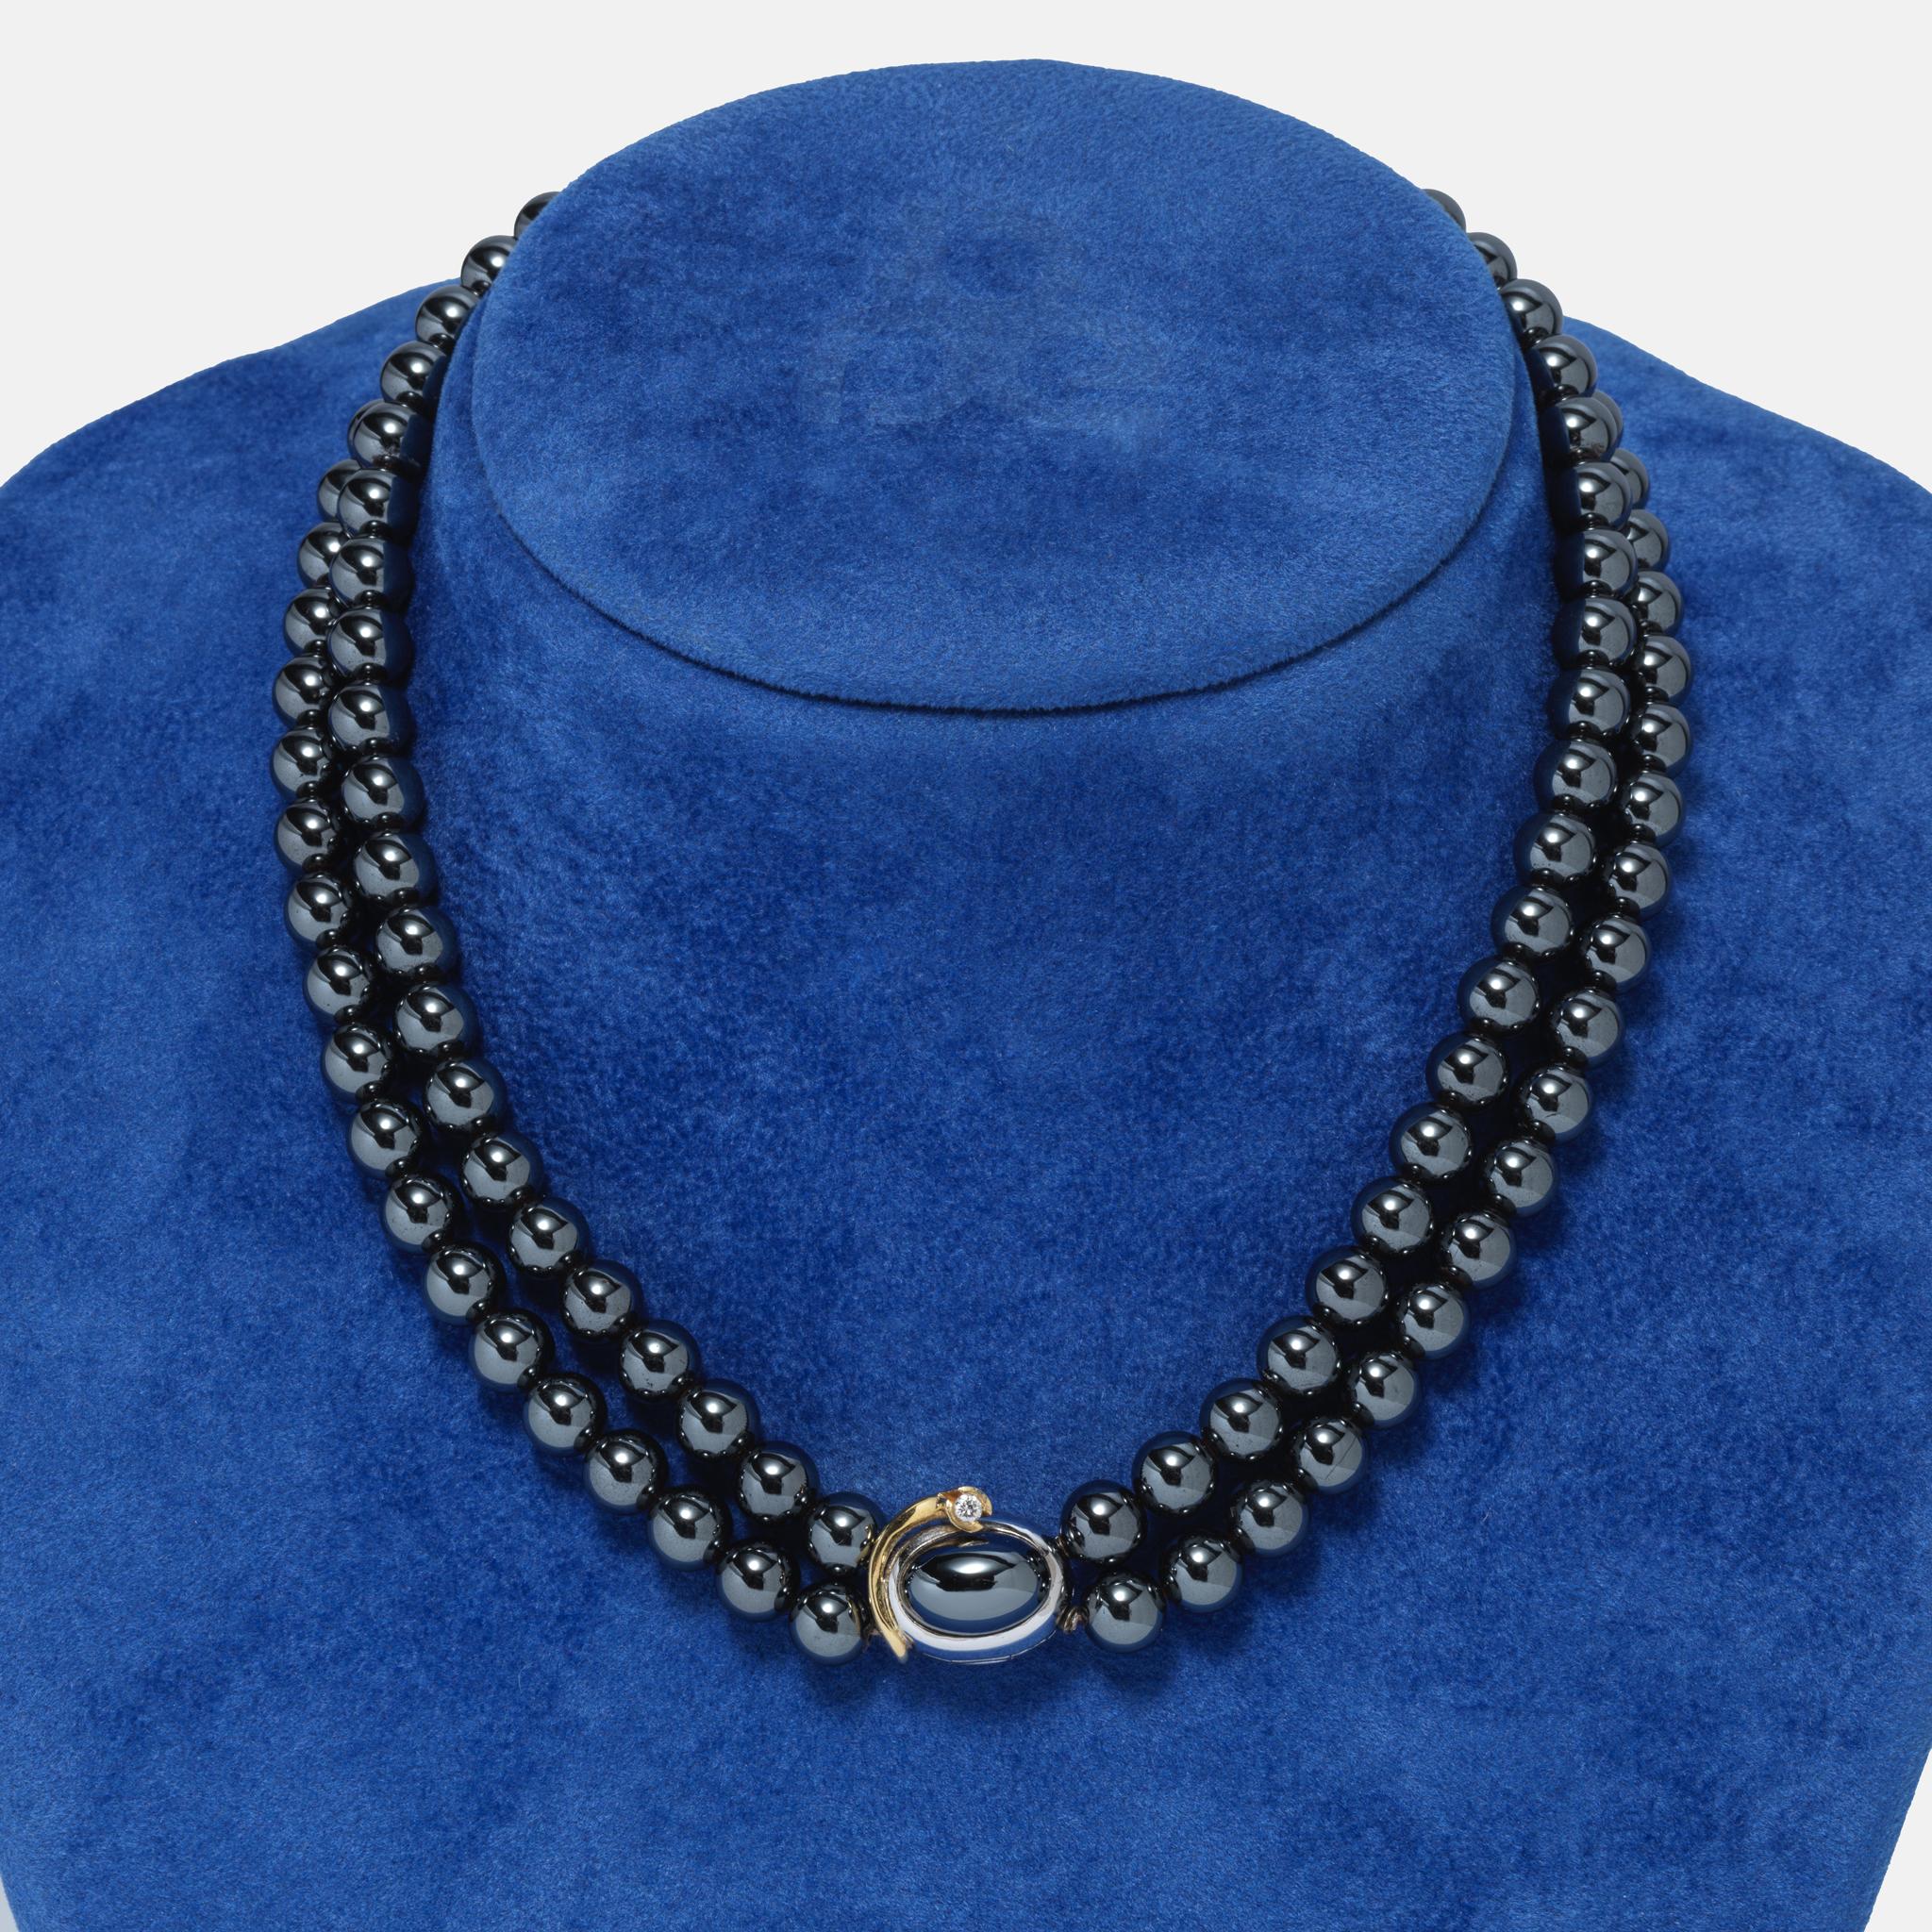 Women's or Men's Ole Lynggaard necklace with hematite beads. Lock made of gold with a diamond. For Sale